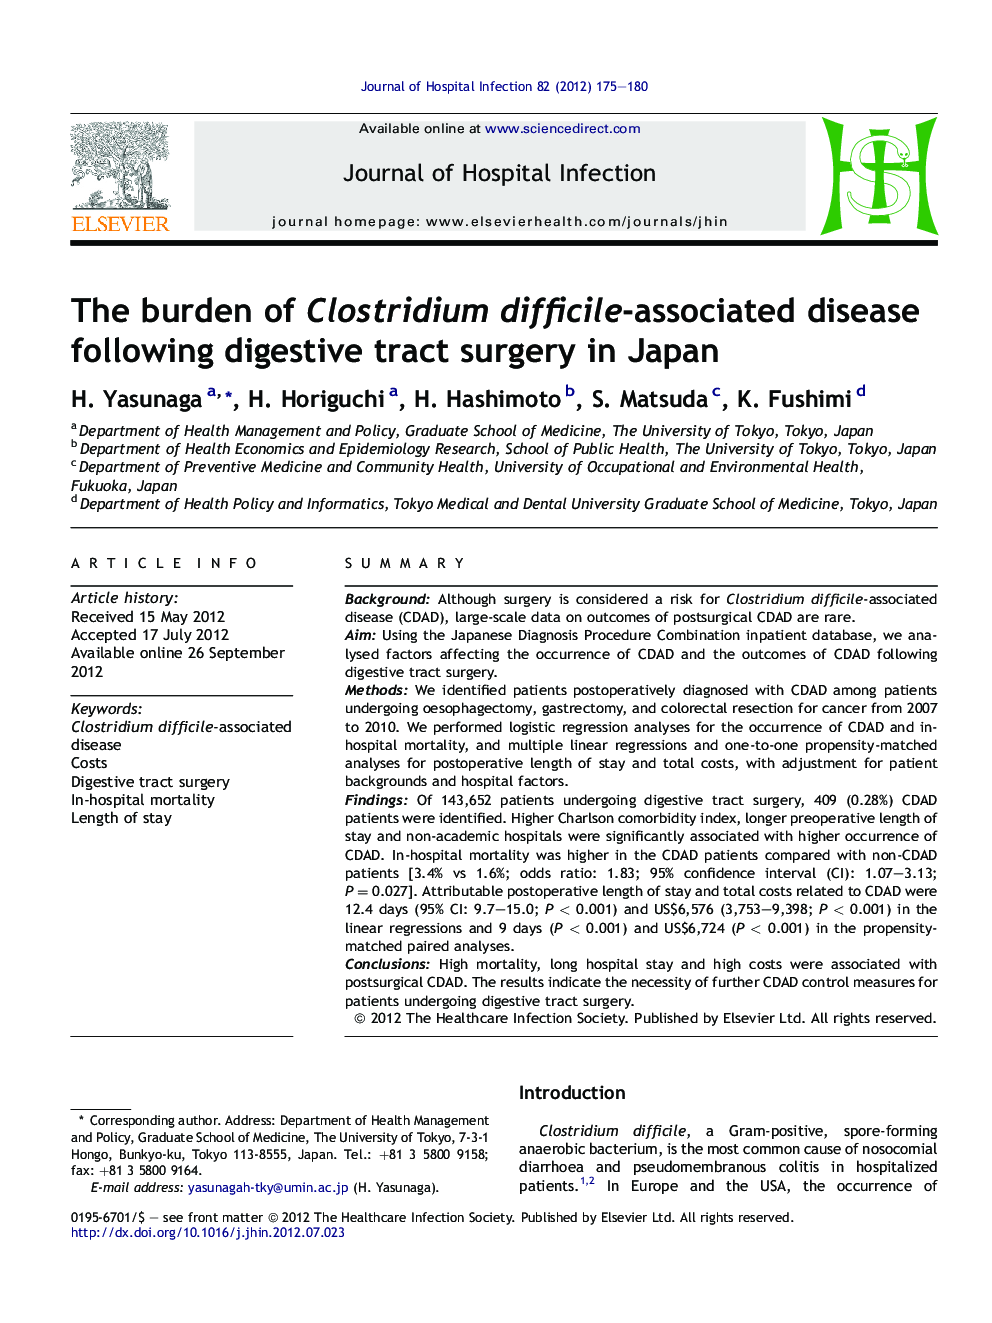 The burden of Clostridium difficile-associated disease following digestive tract surgery in Japan